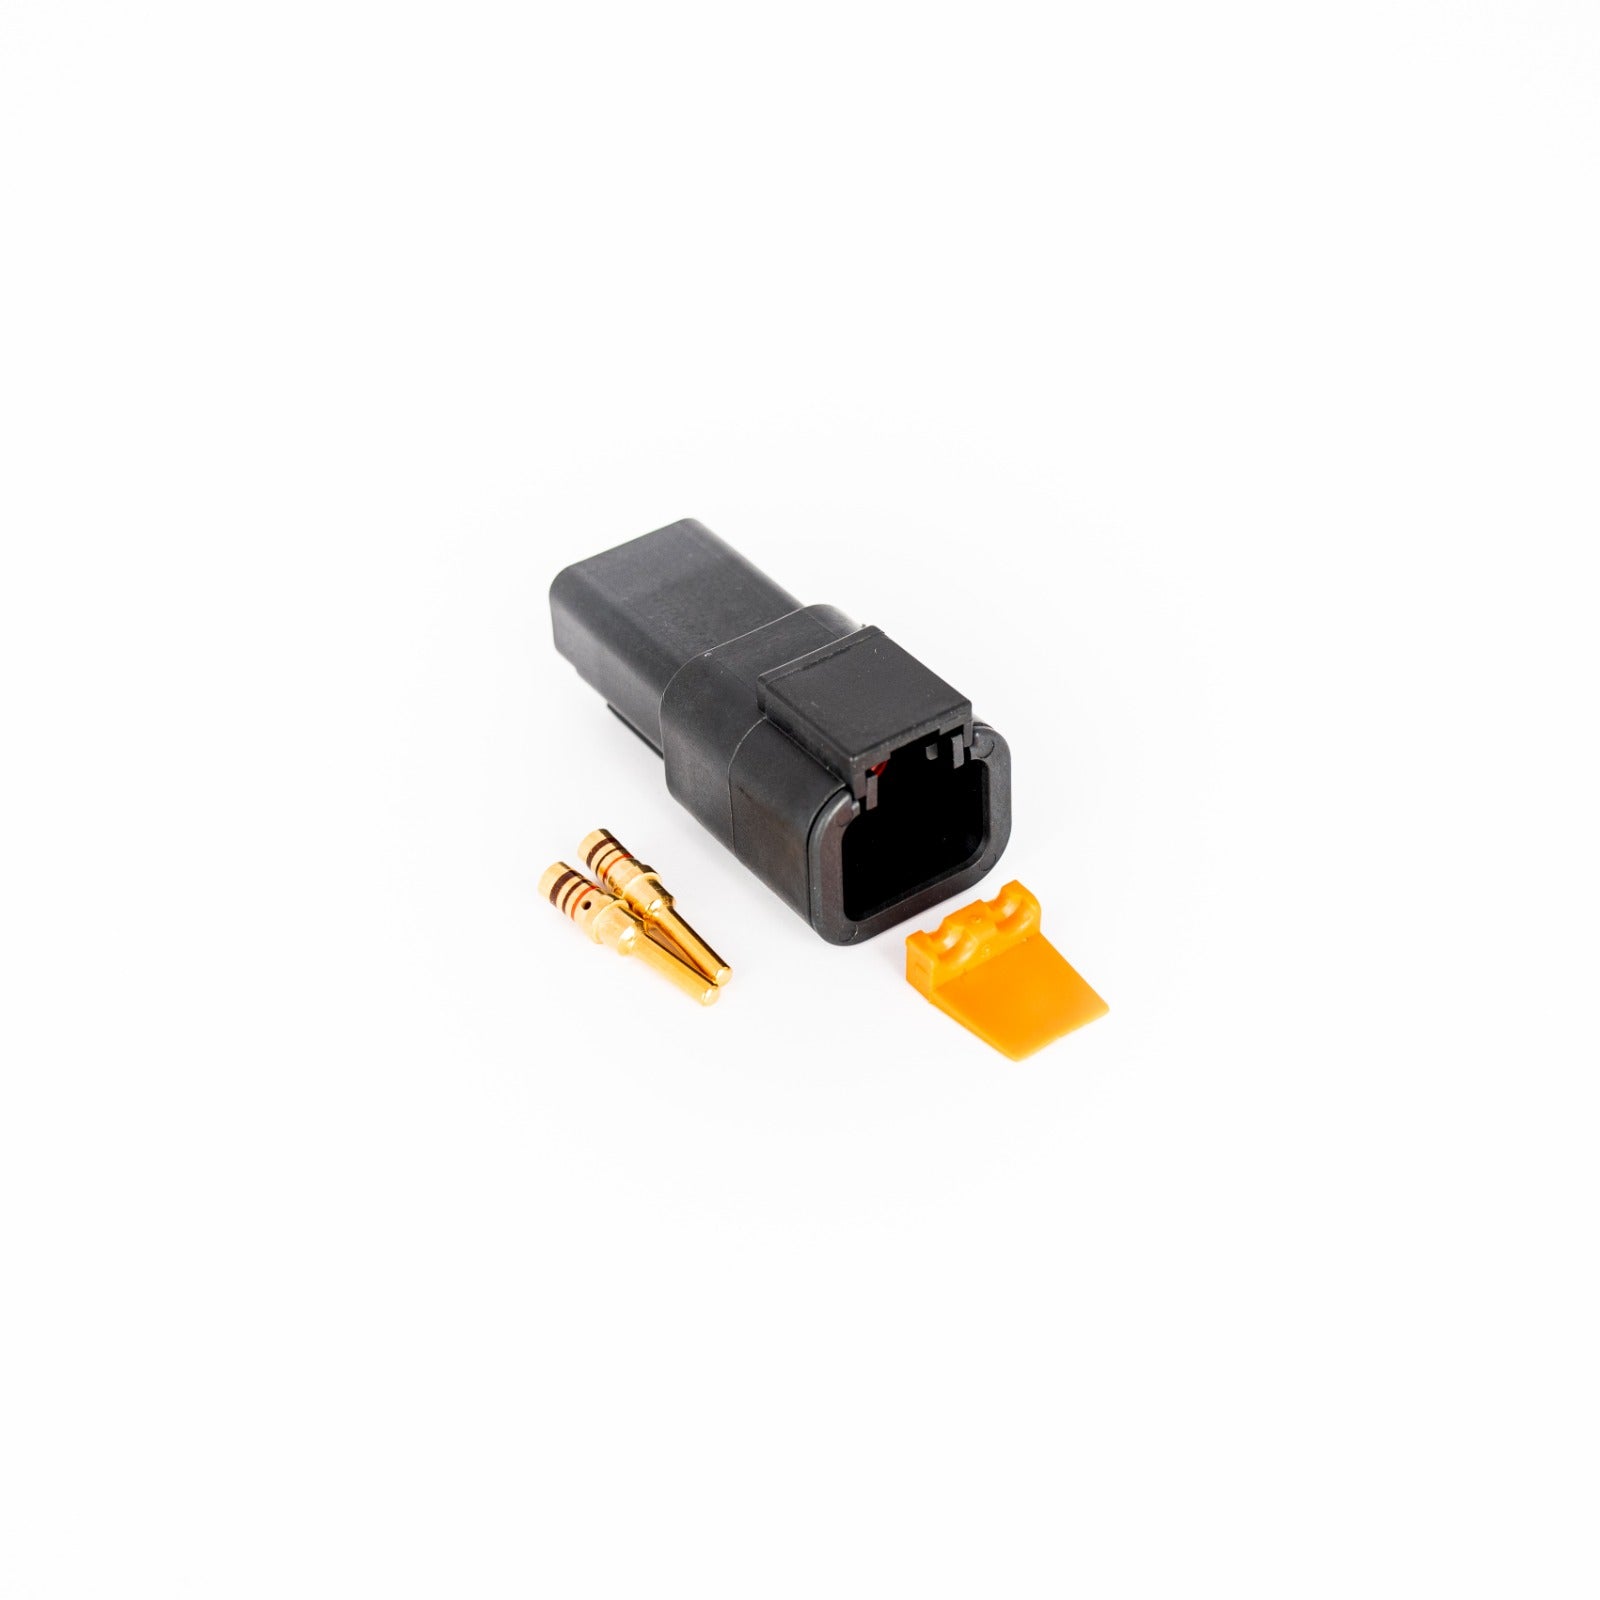 DTP/DTHD Receptacle Connector Kit